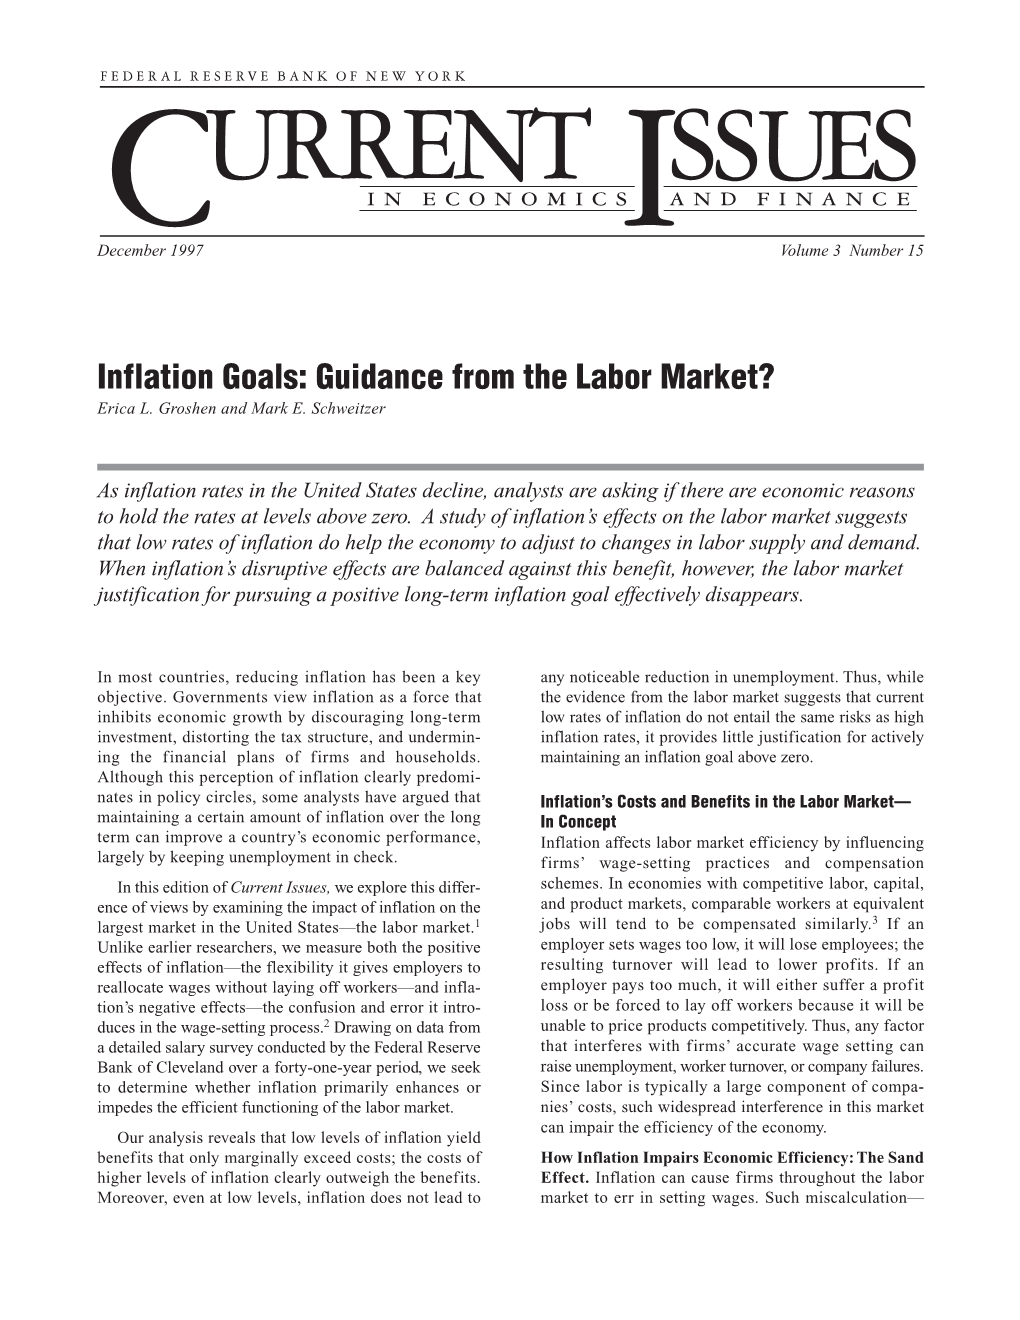 Inflation Goals: Guidance from the Labor Market? Erica L